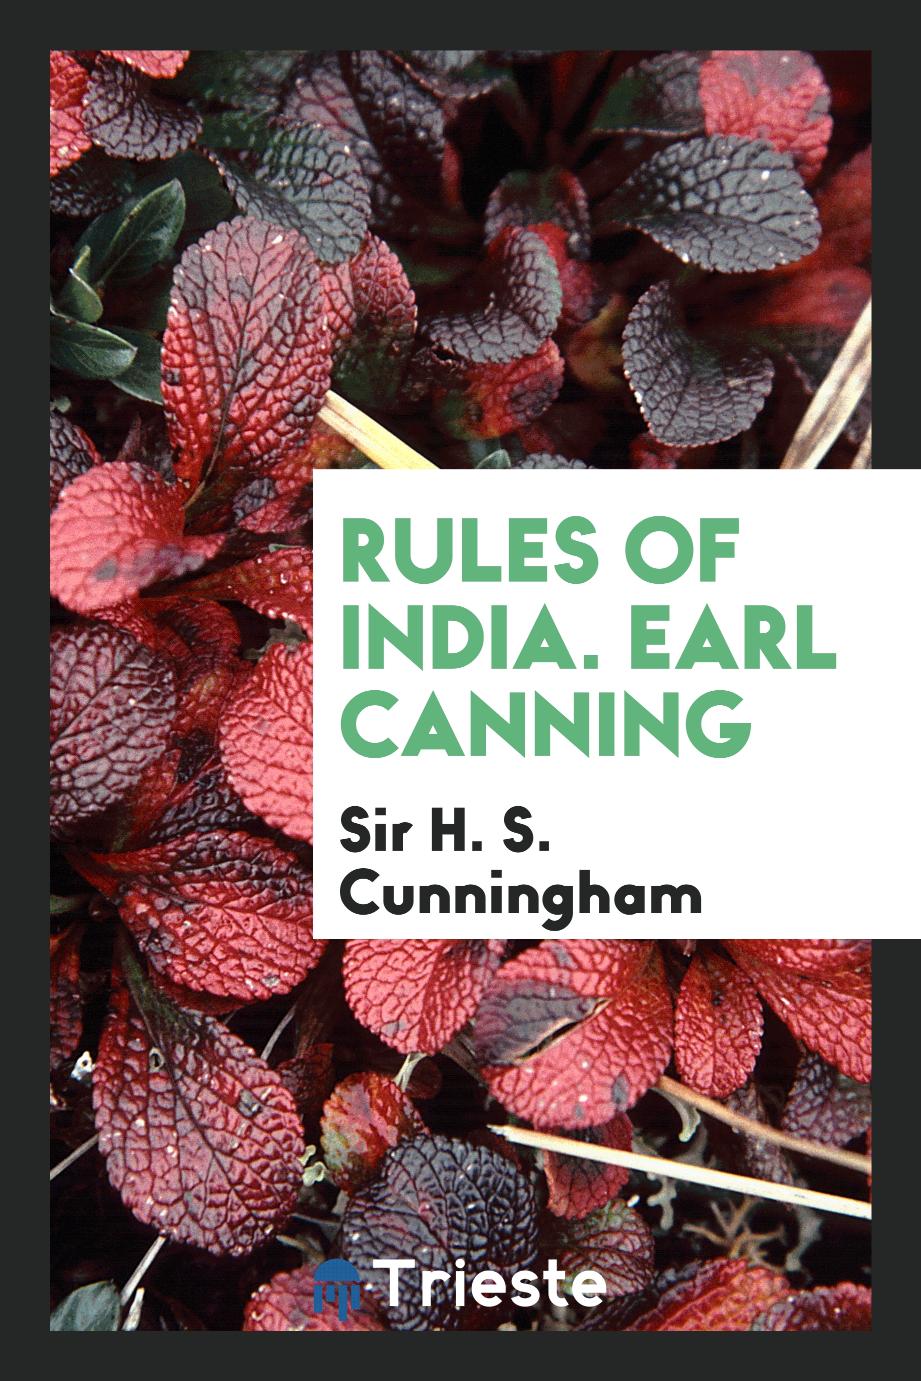 Sir H. S. Cunningham - Rules of India. Earl Canning